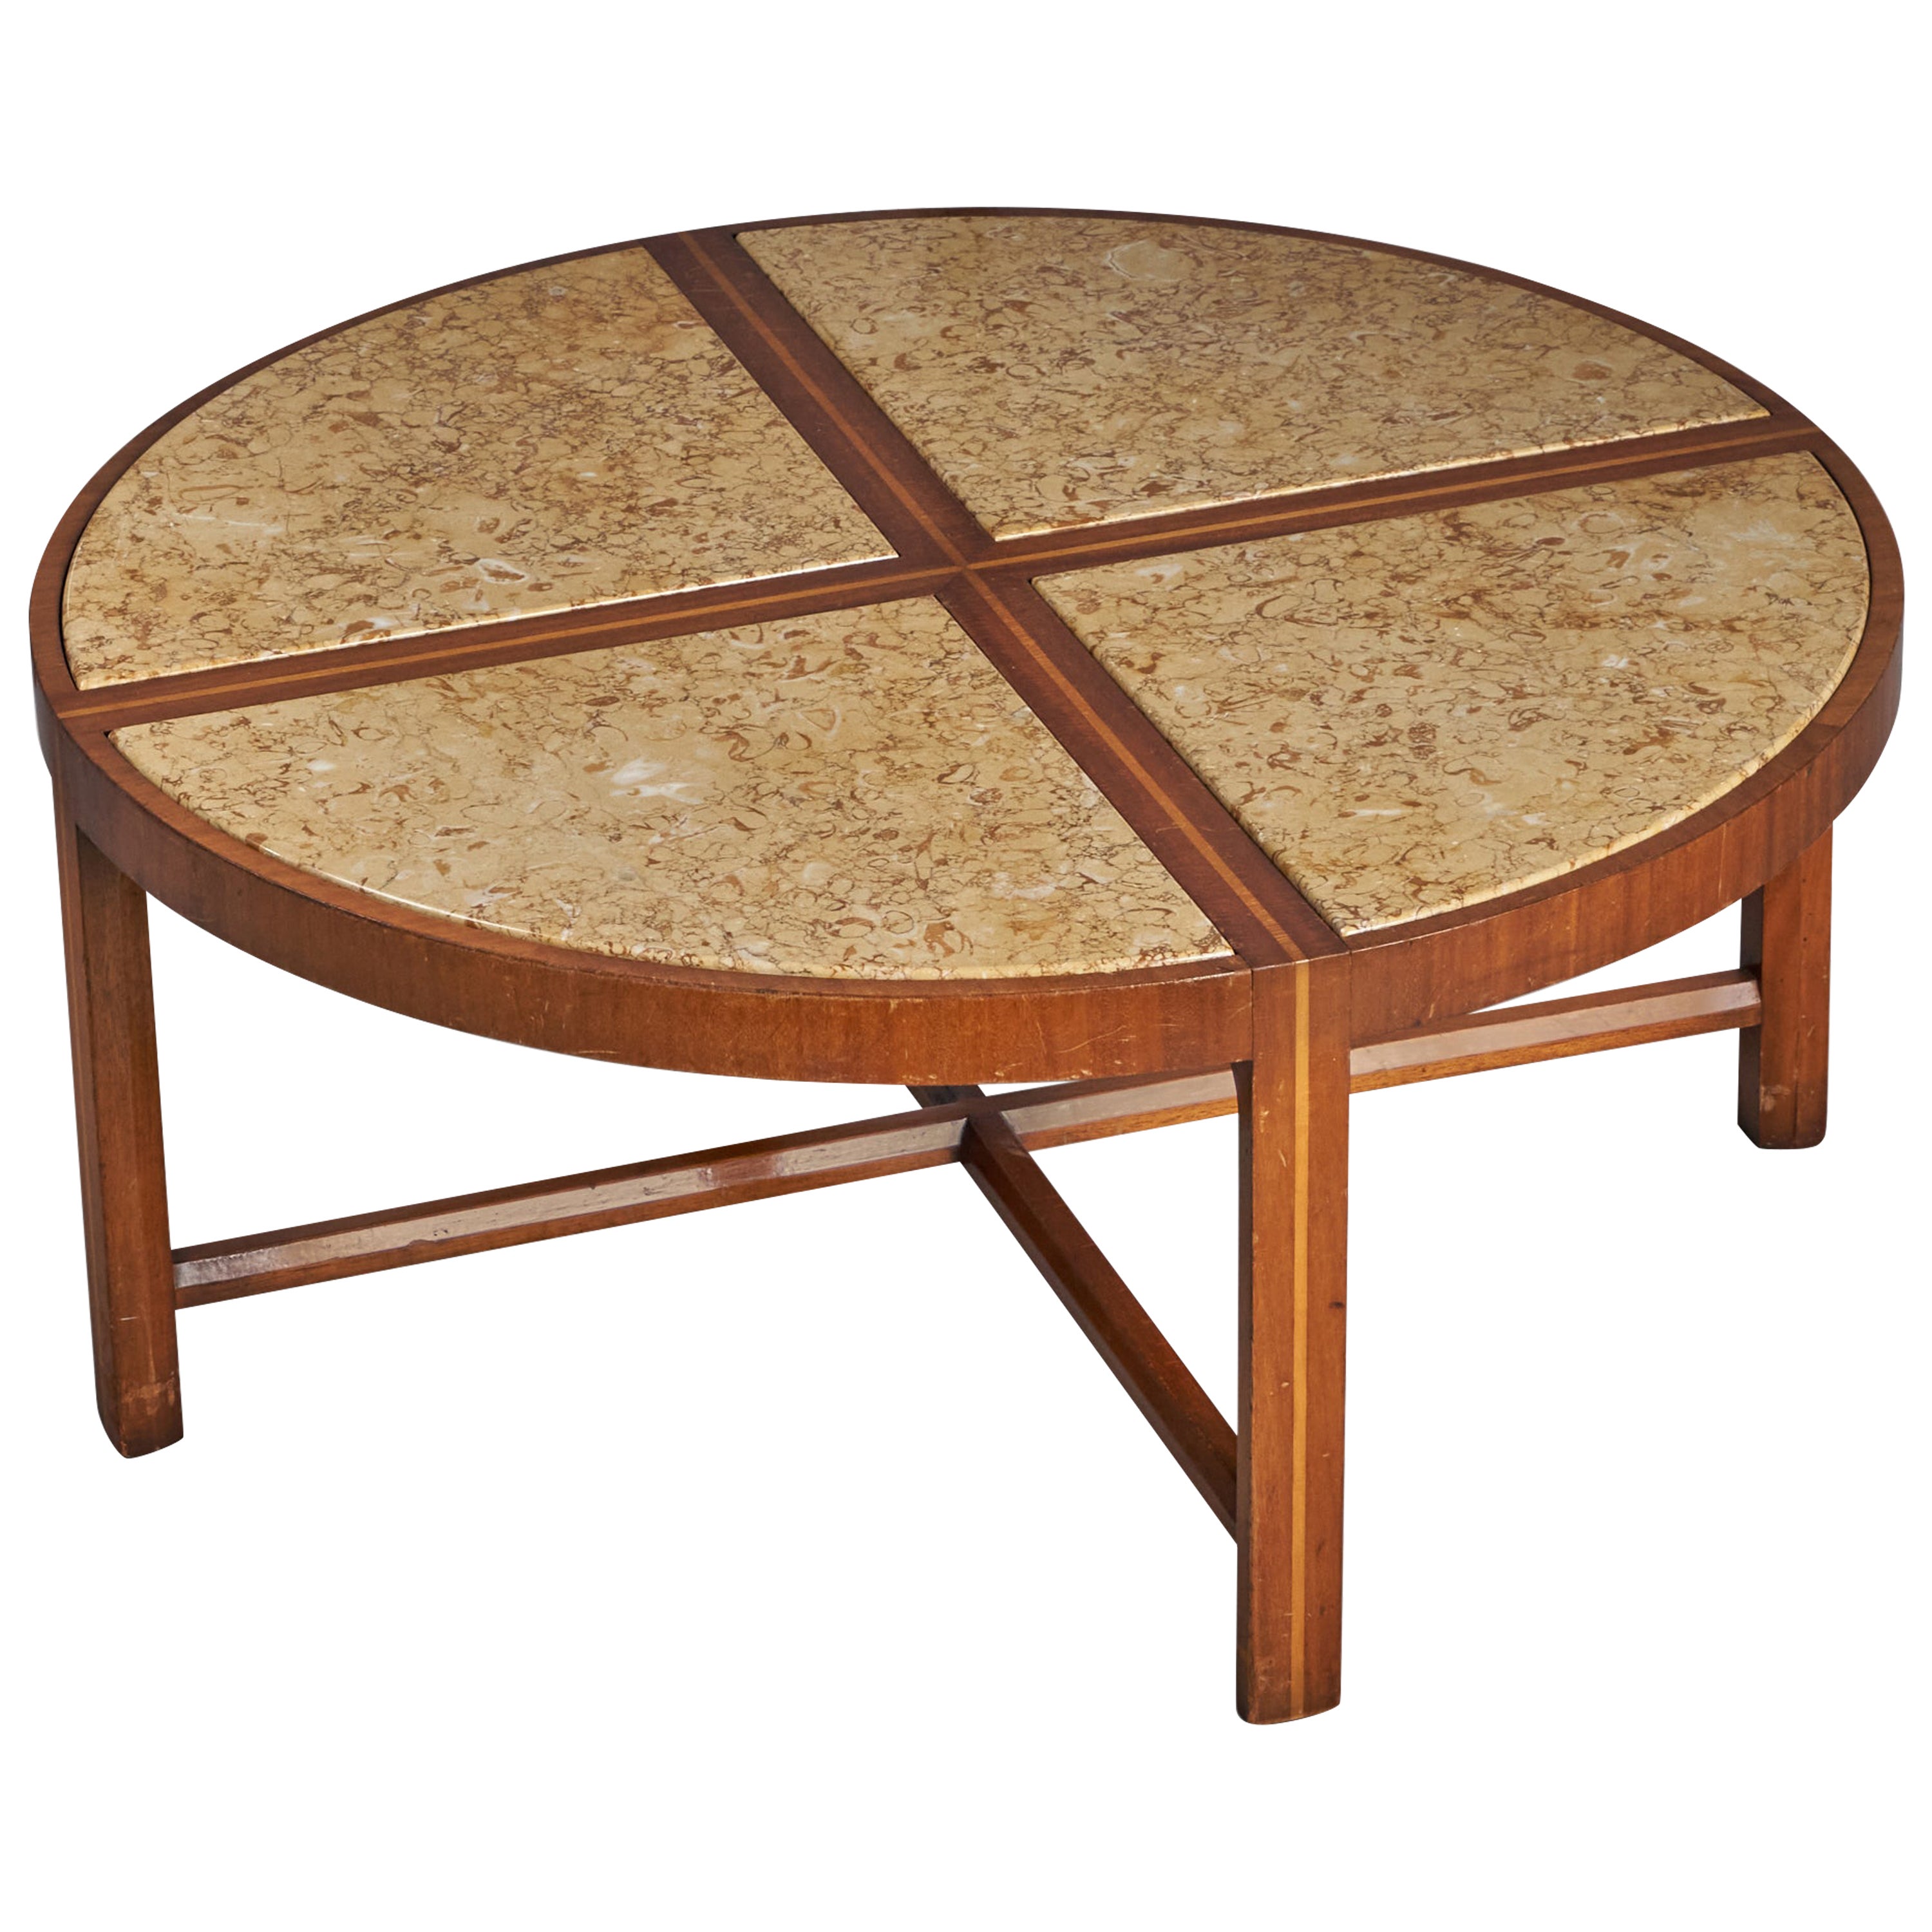 Tommi Parzinger, Coffee Table, Walnut, Travertine, USA, 1950s For Sale